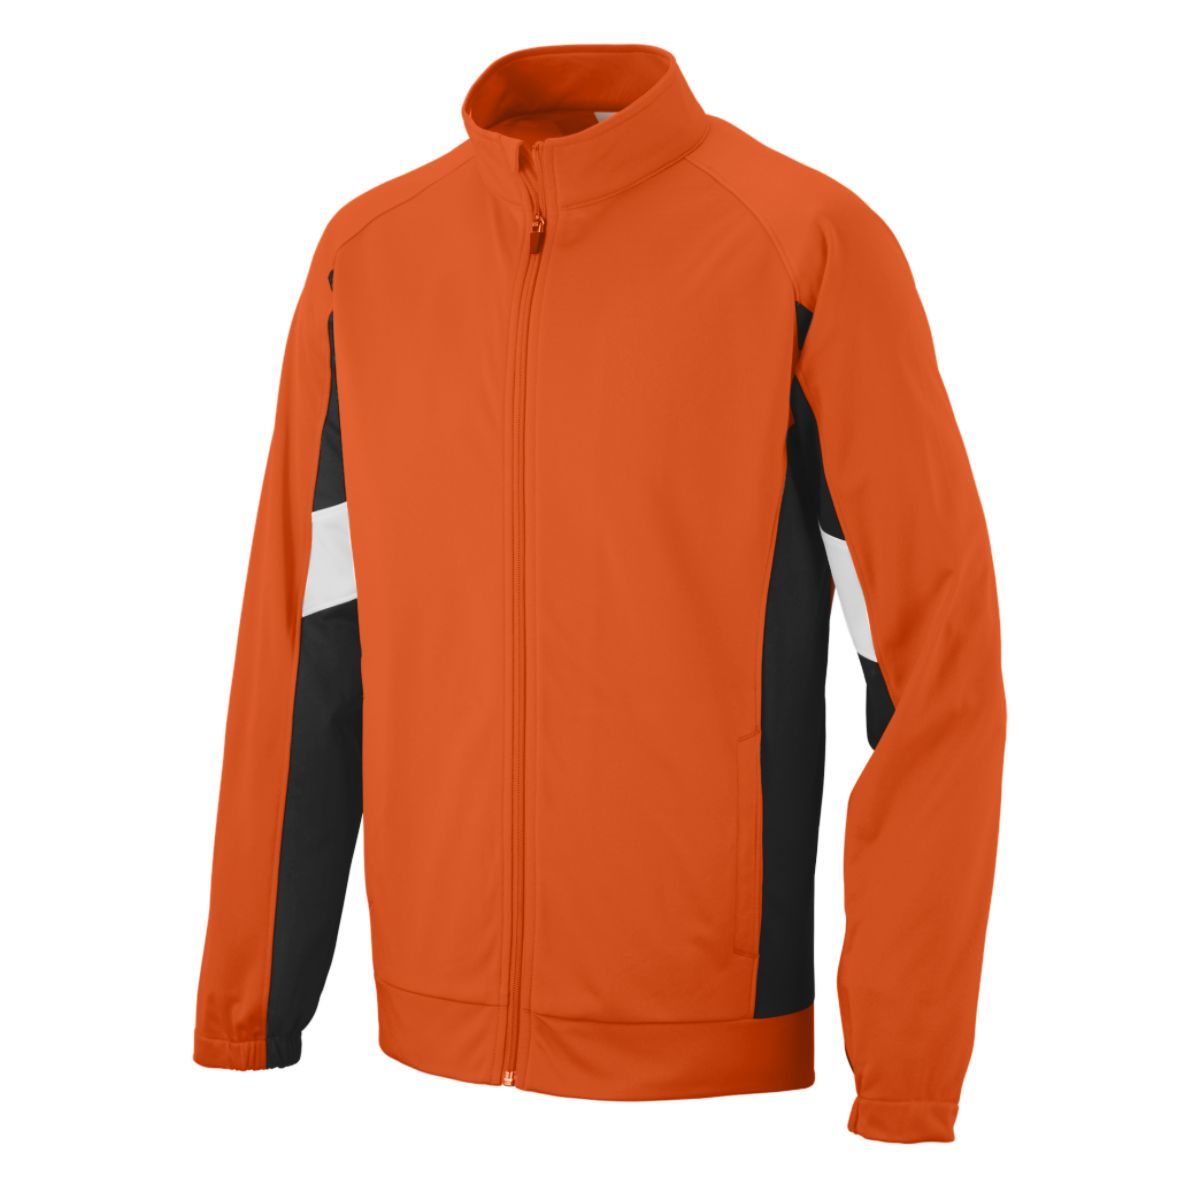 Augusta Sportswear Youth Tour De Force Jacket in Orange/Black/White  -Part of the Youth, Youth-Jacket, Augusta-Products, Outerwear product lines at KanaleyCreations.com